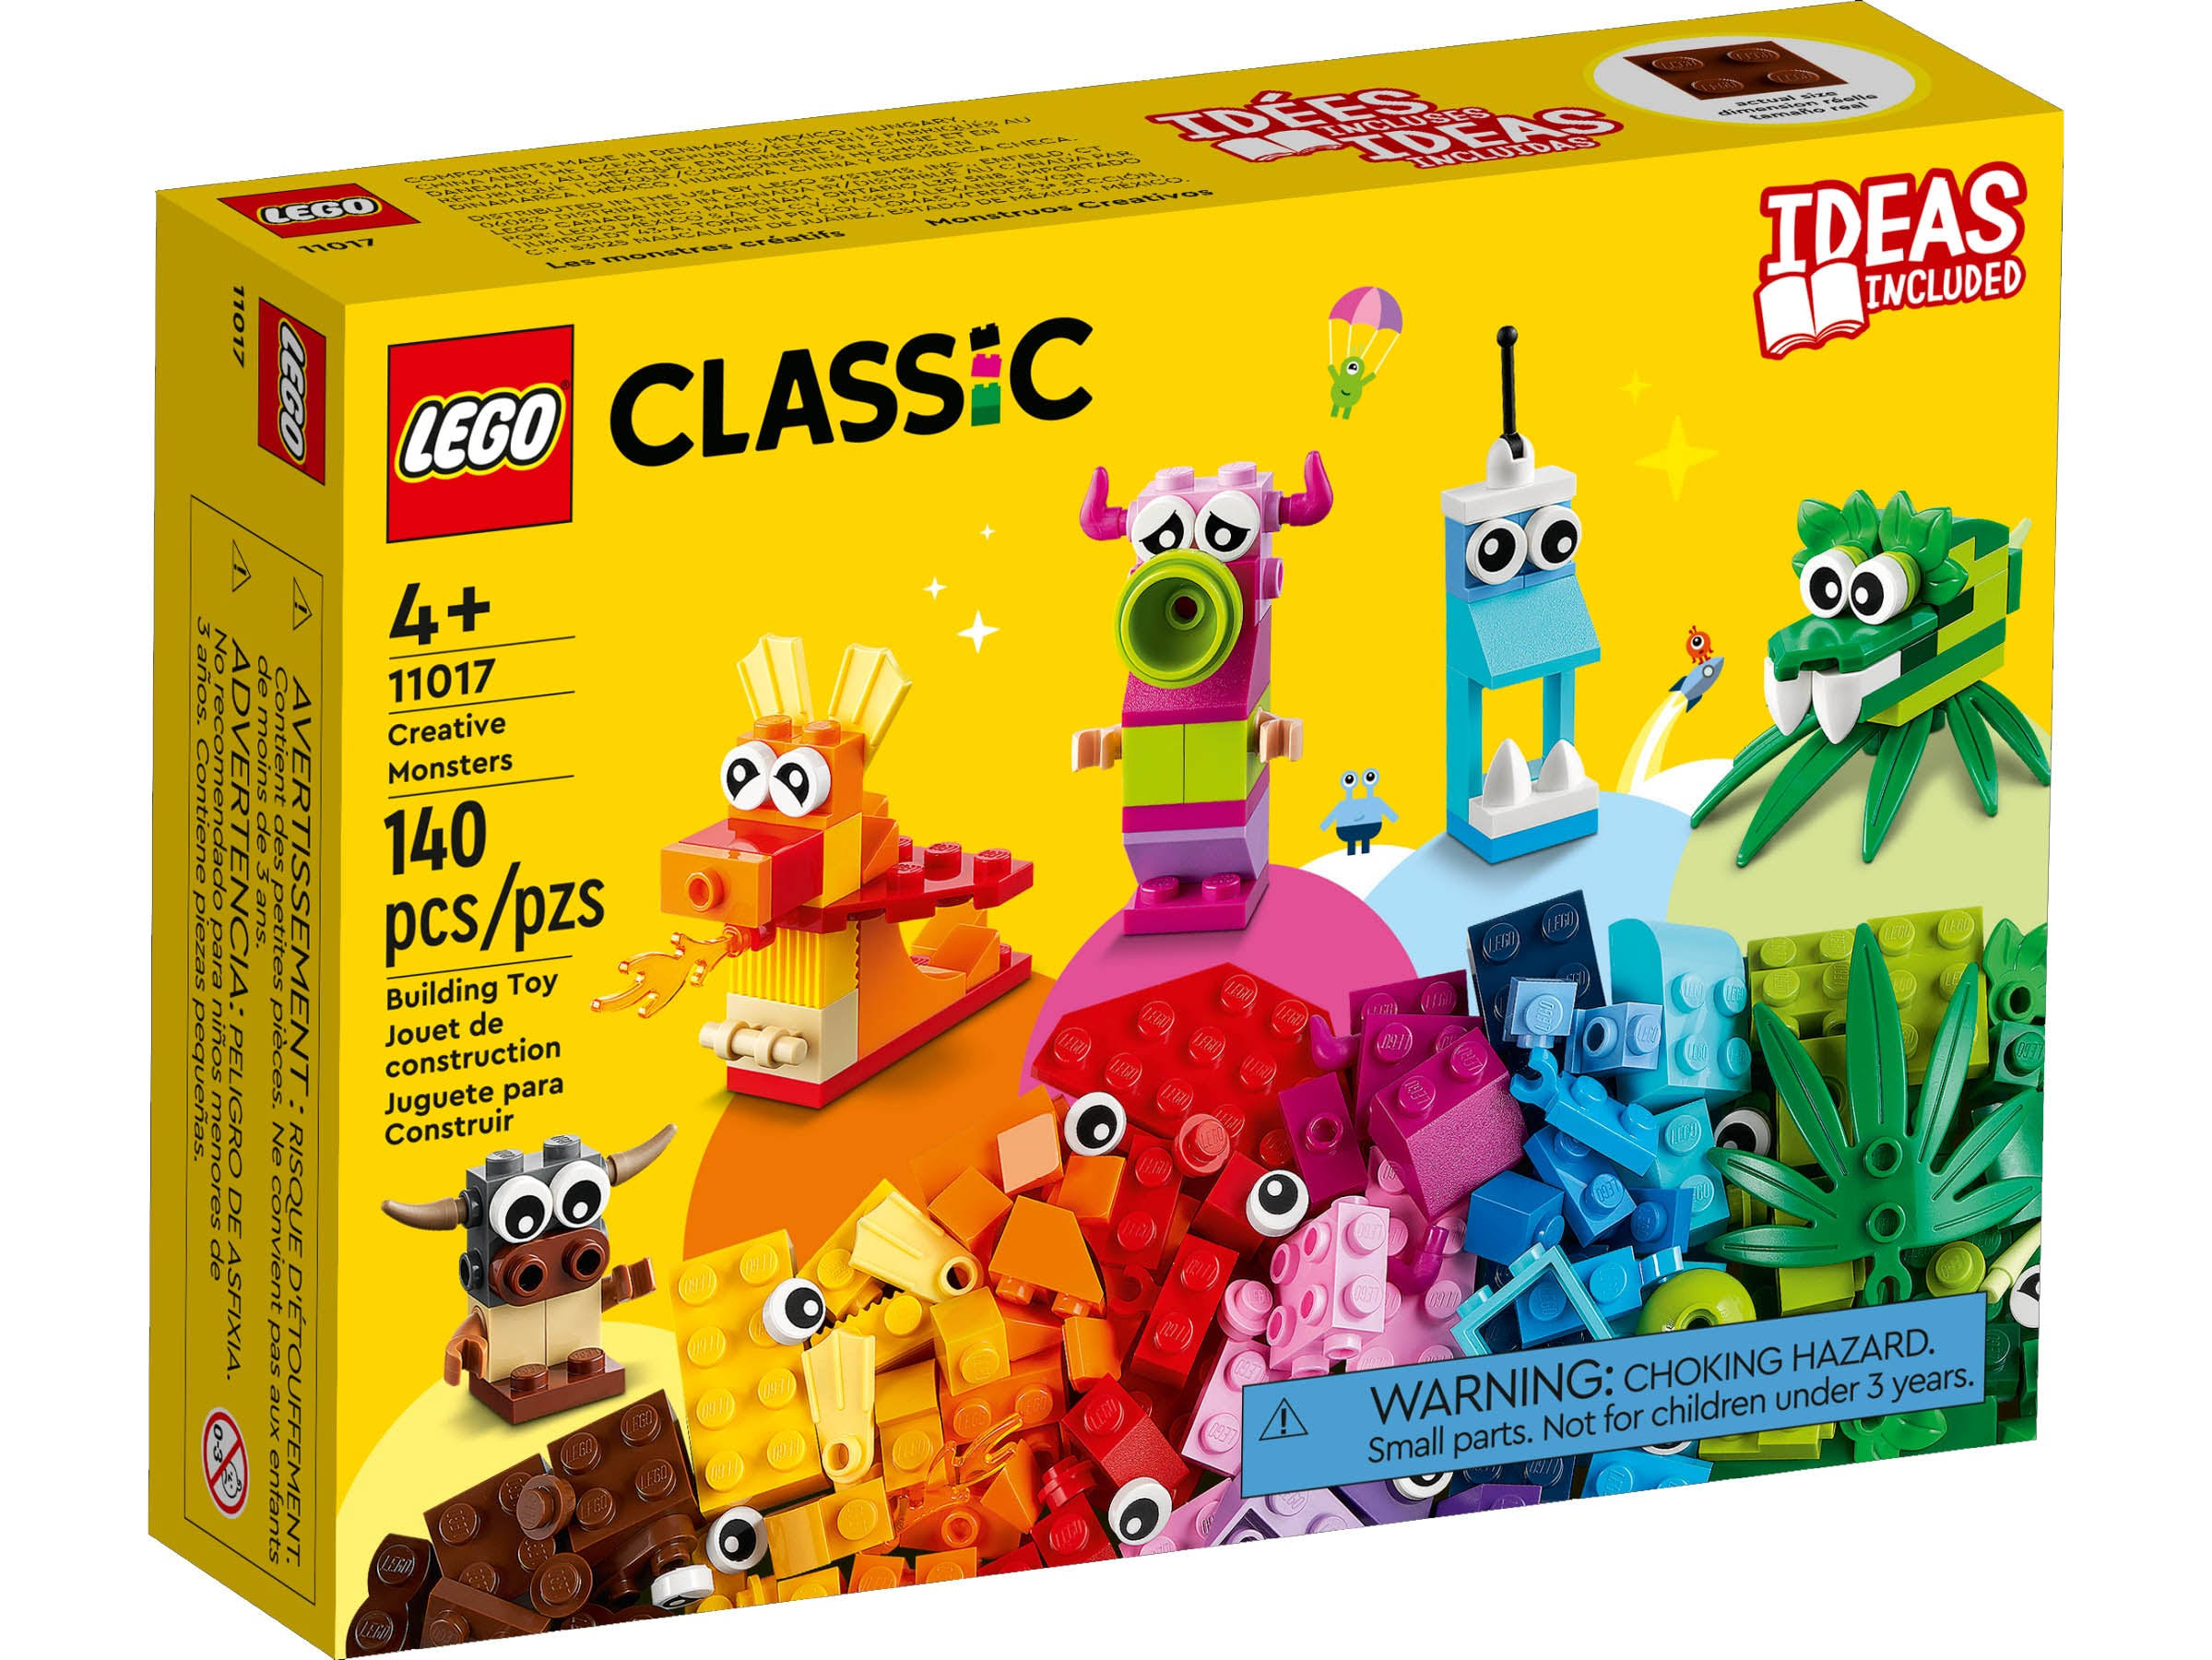 LEGO Classic Creative Monsters 11017 Building Kit; Includes 5 Monster